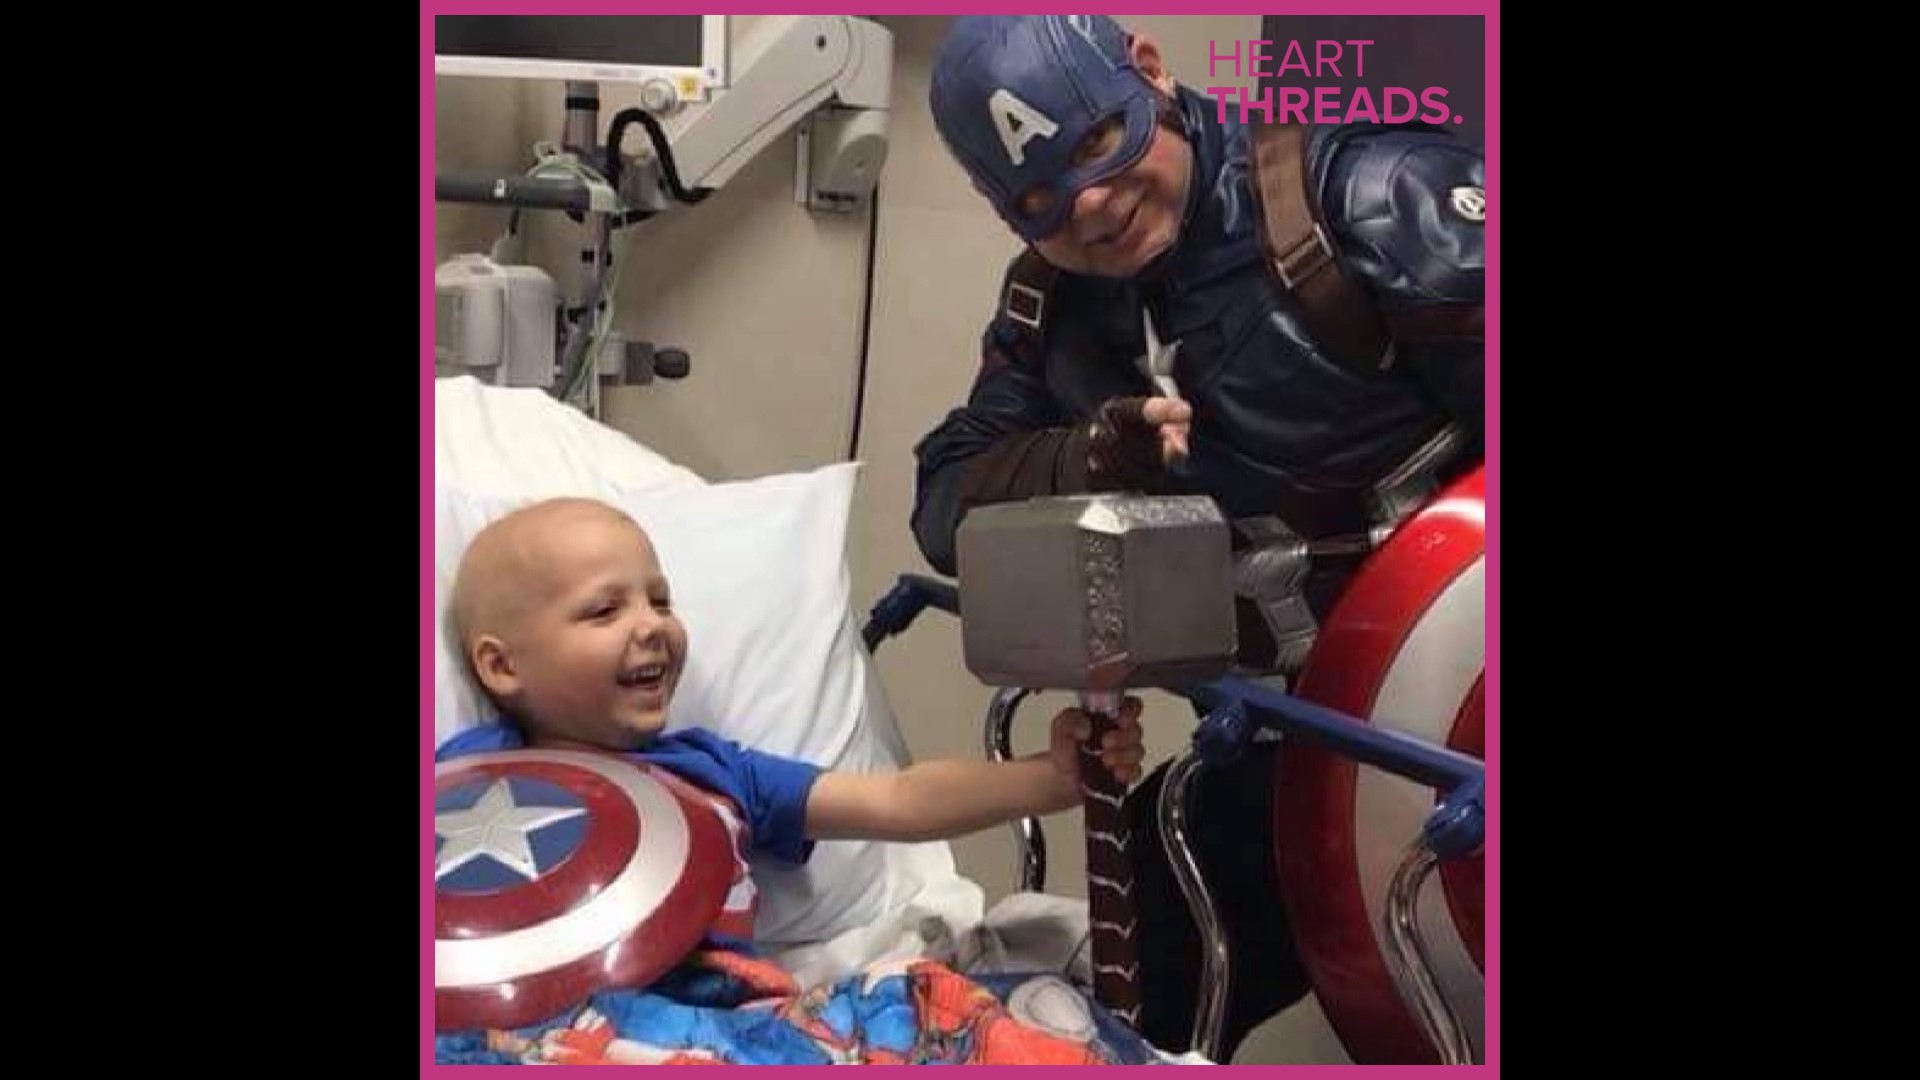 Deputy Sean Slattery's heart attack made him realize that time is precious. That's when he decided to suit up as Captain America to bring joy to people who need it.